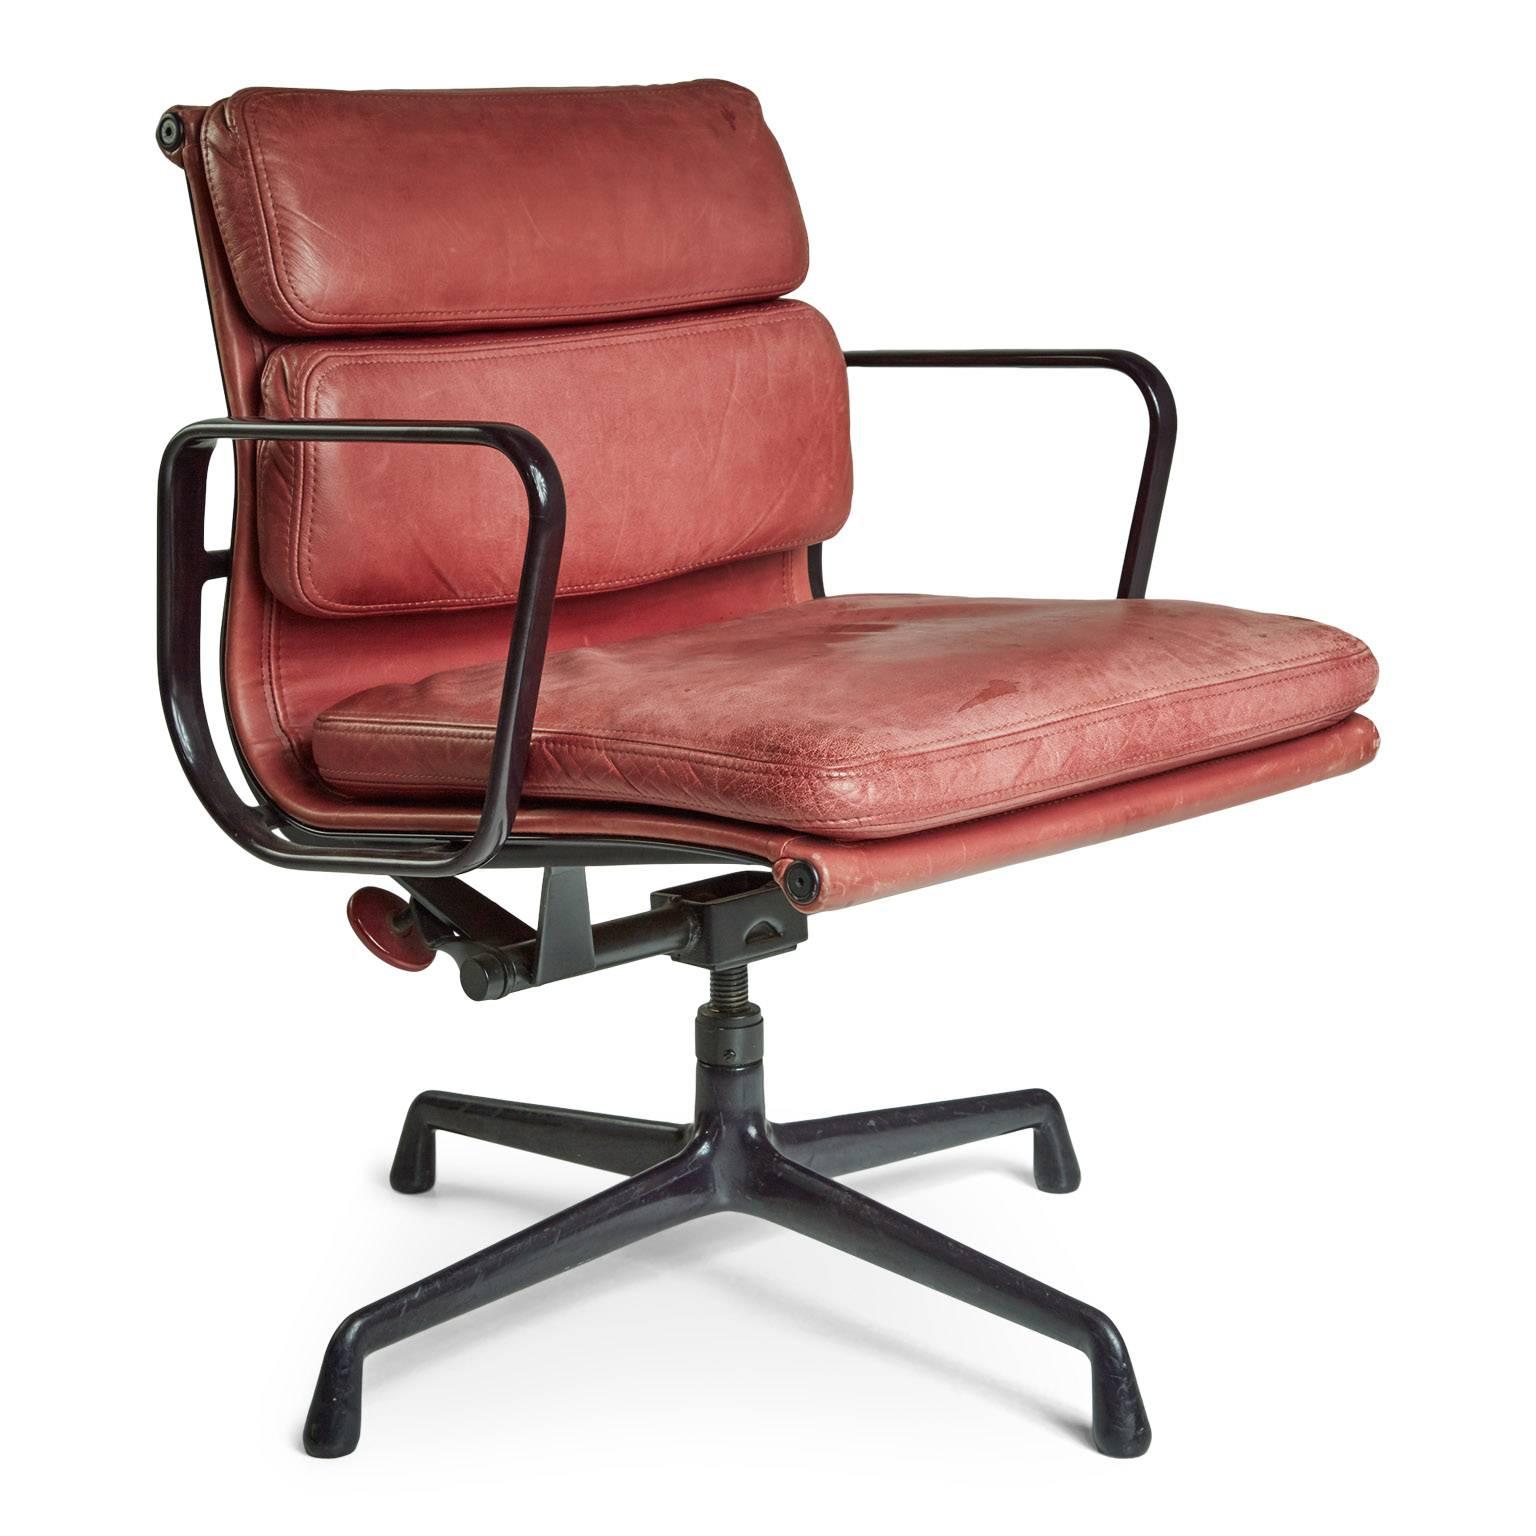 Pair of His and Hers matching soft pad aluminium group management and executive desk chairs designed by Charles and Ray Eames for Herman Miller. Featuring the original burgundy leather upholstery that has developed an admirable patina. These traces